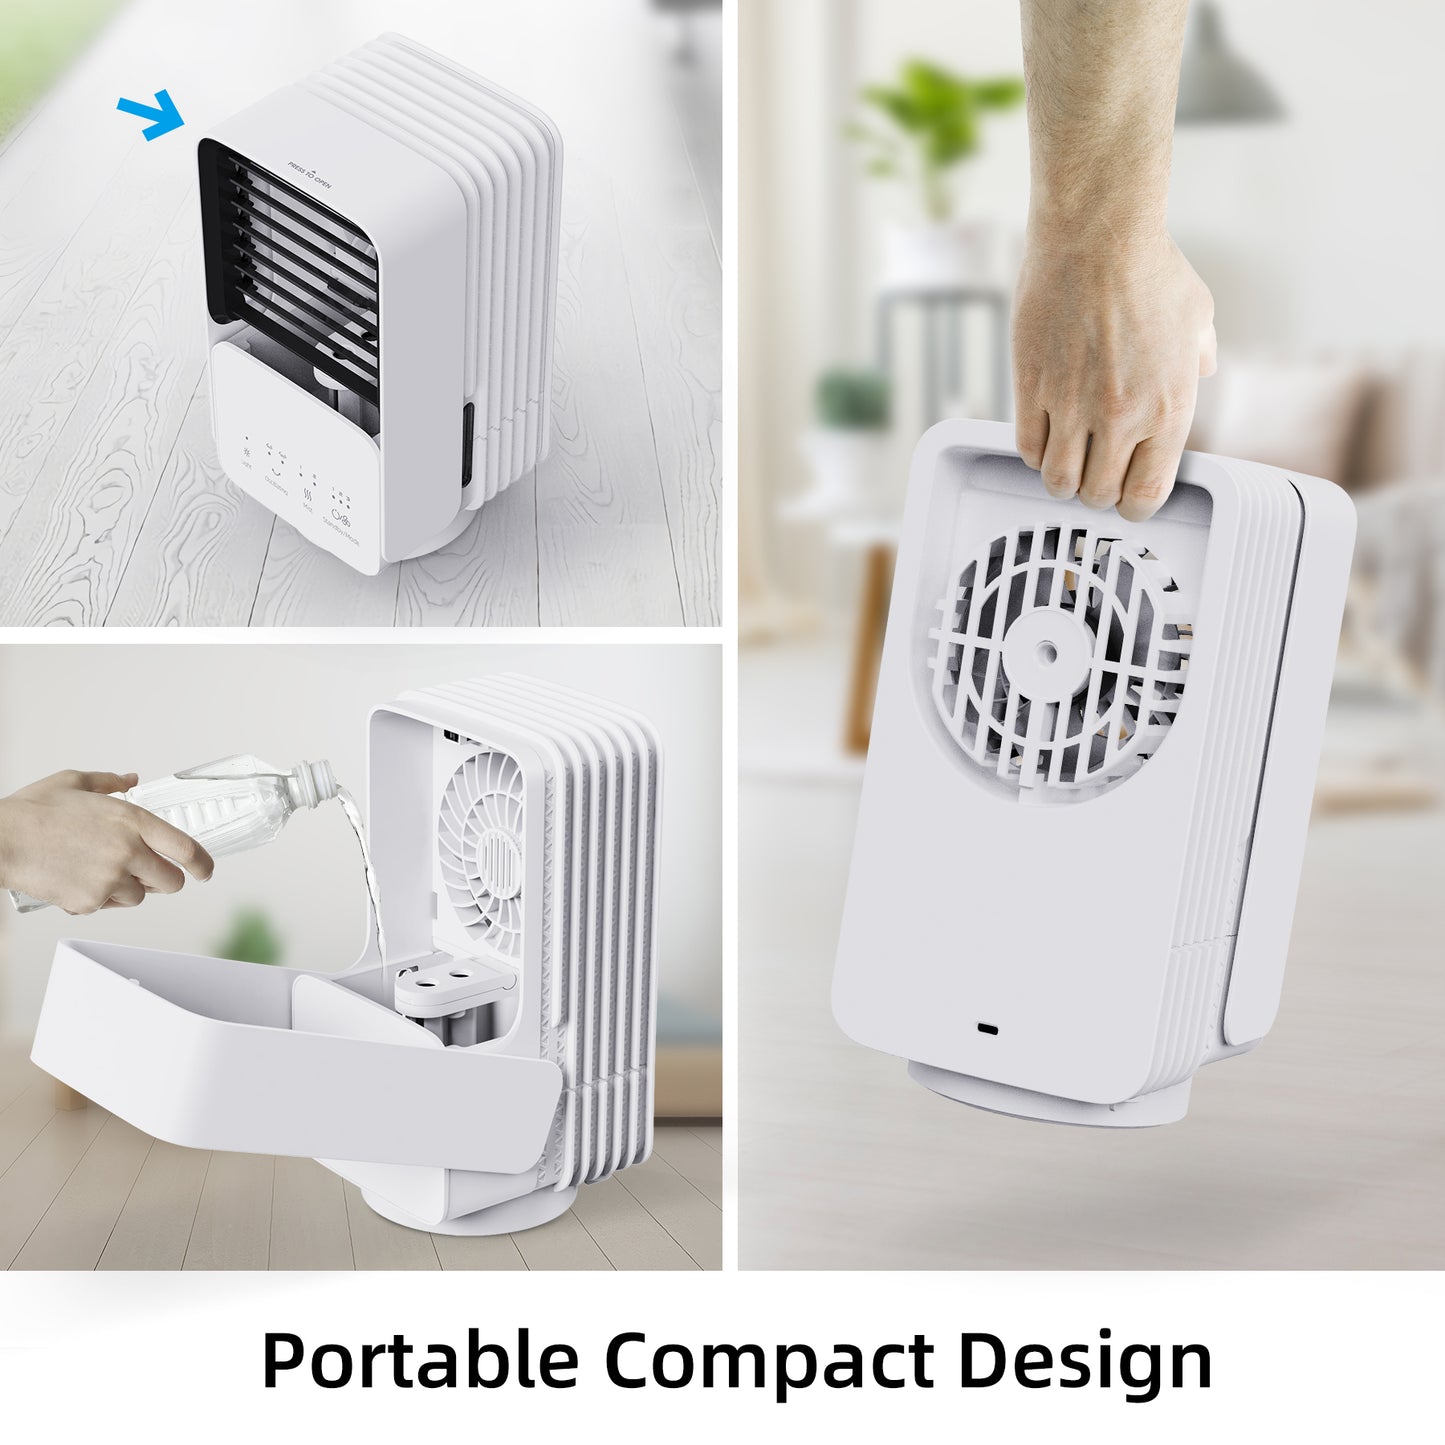 ALROCKET Portable Air Cooler , Personal Mini Evaporative Cooler Air Conditioner Fan for Home, Office, Room . White